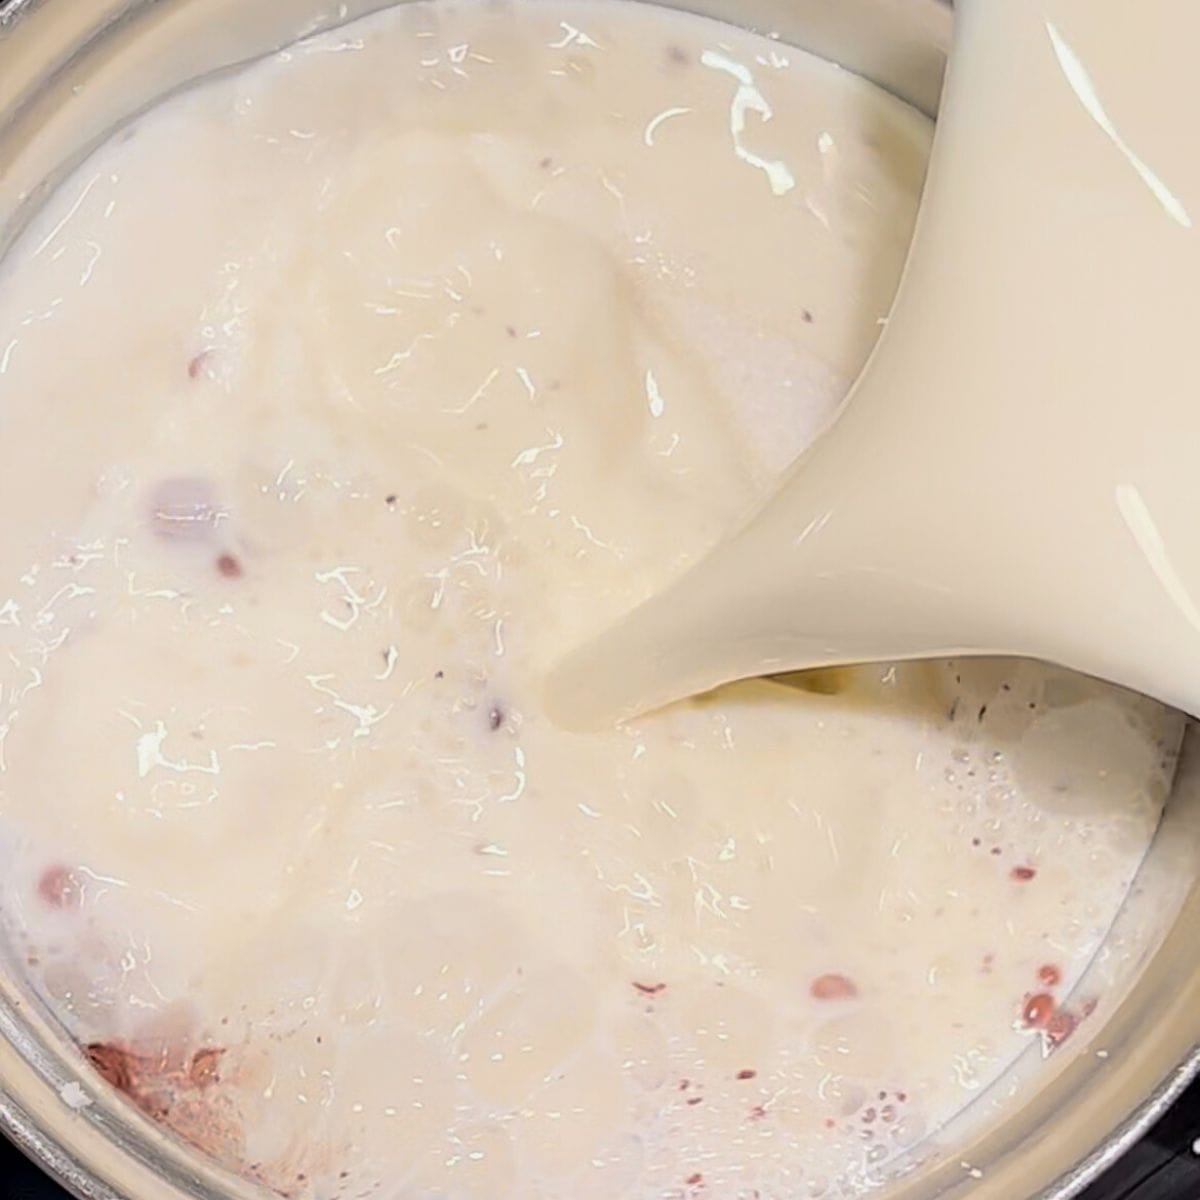 Milk poured into ingredients in small saucepan.